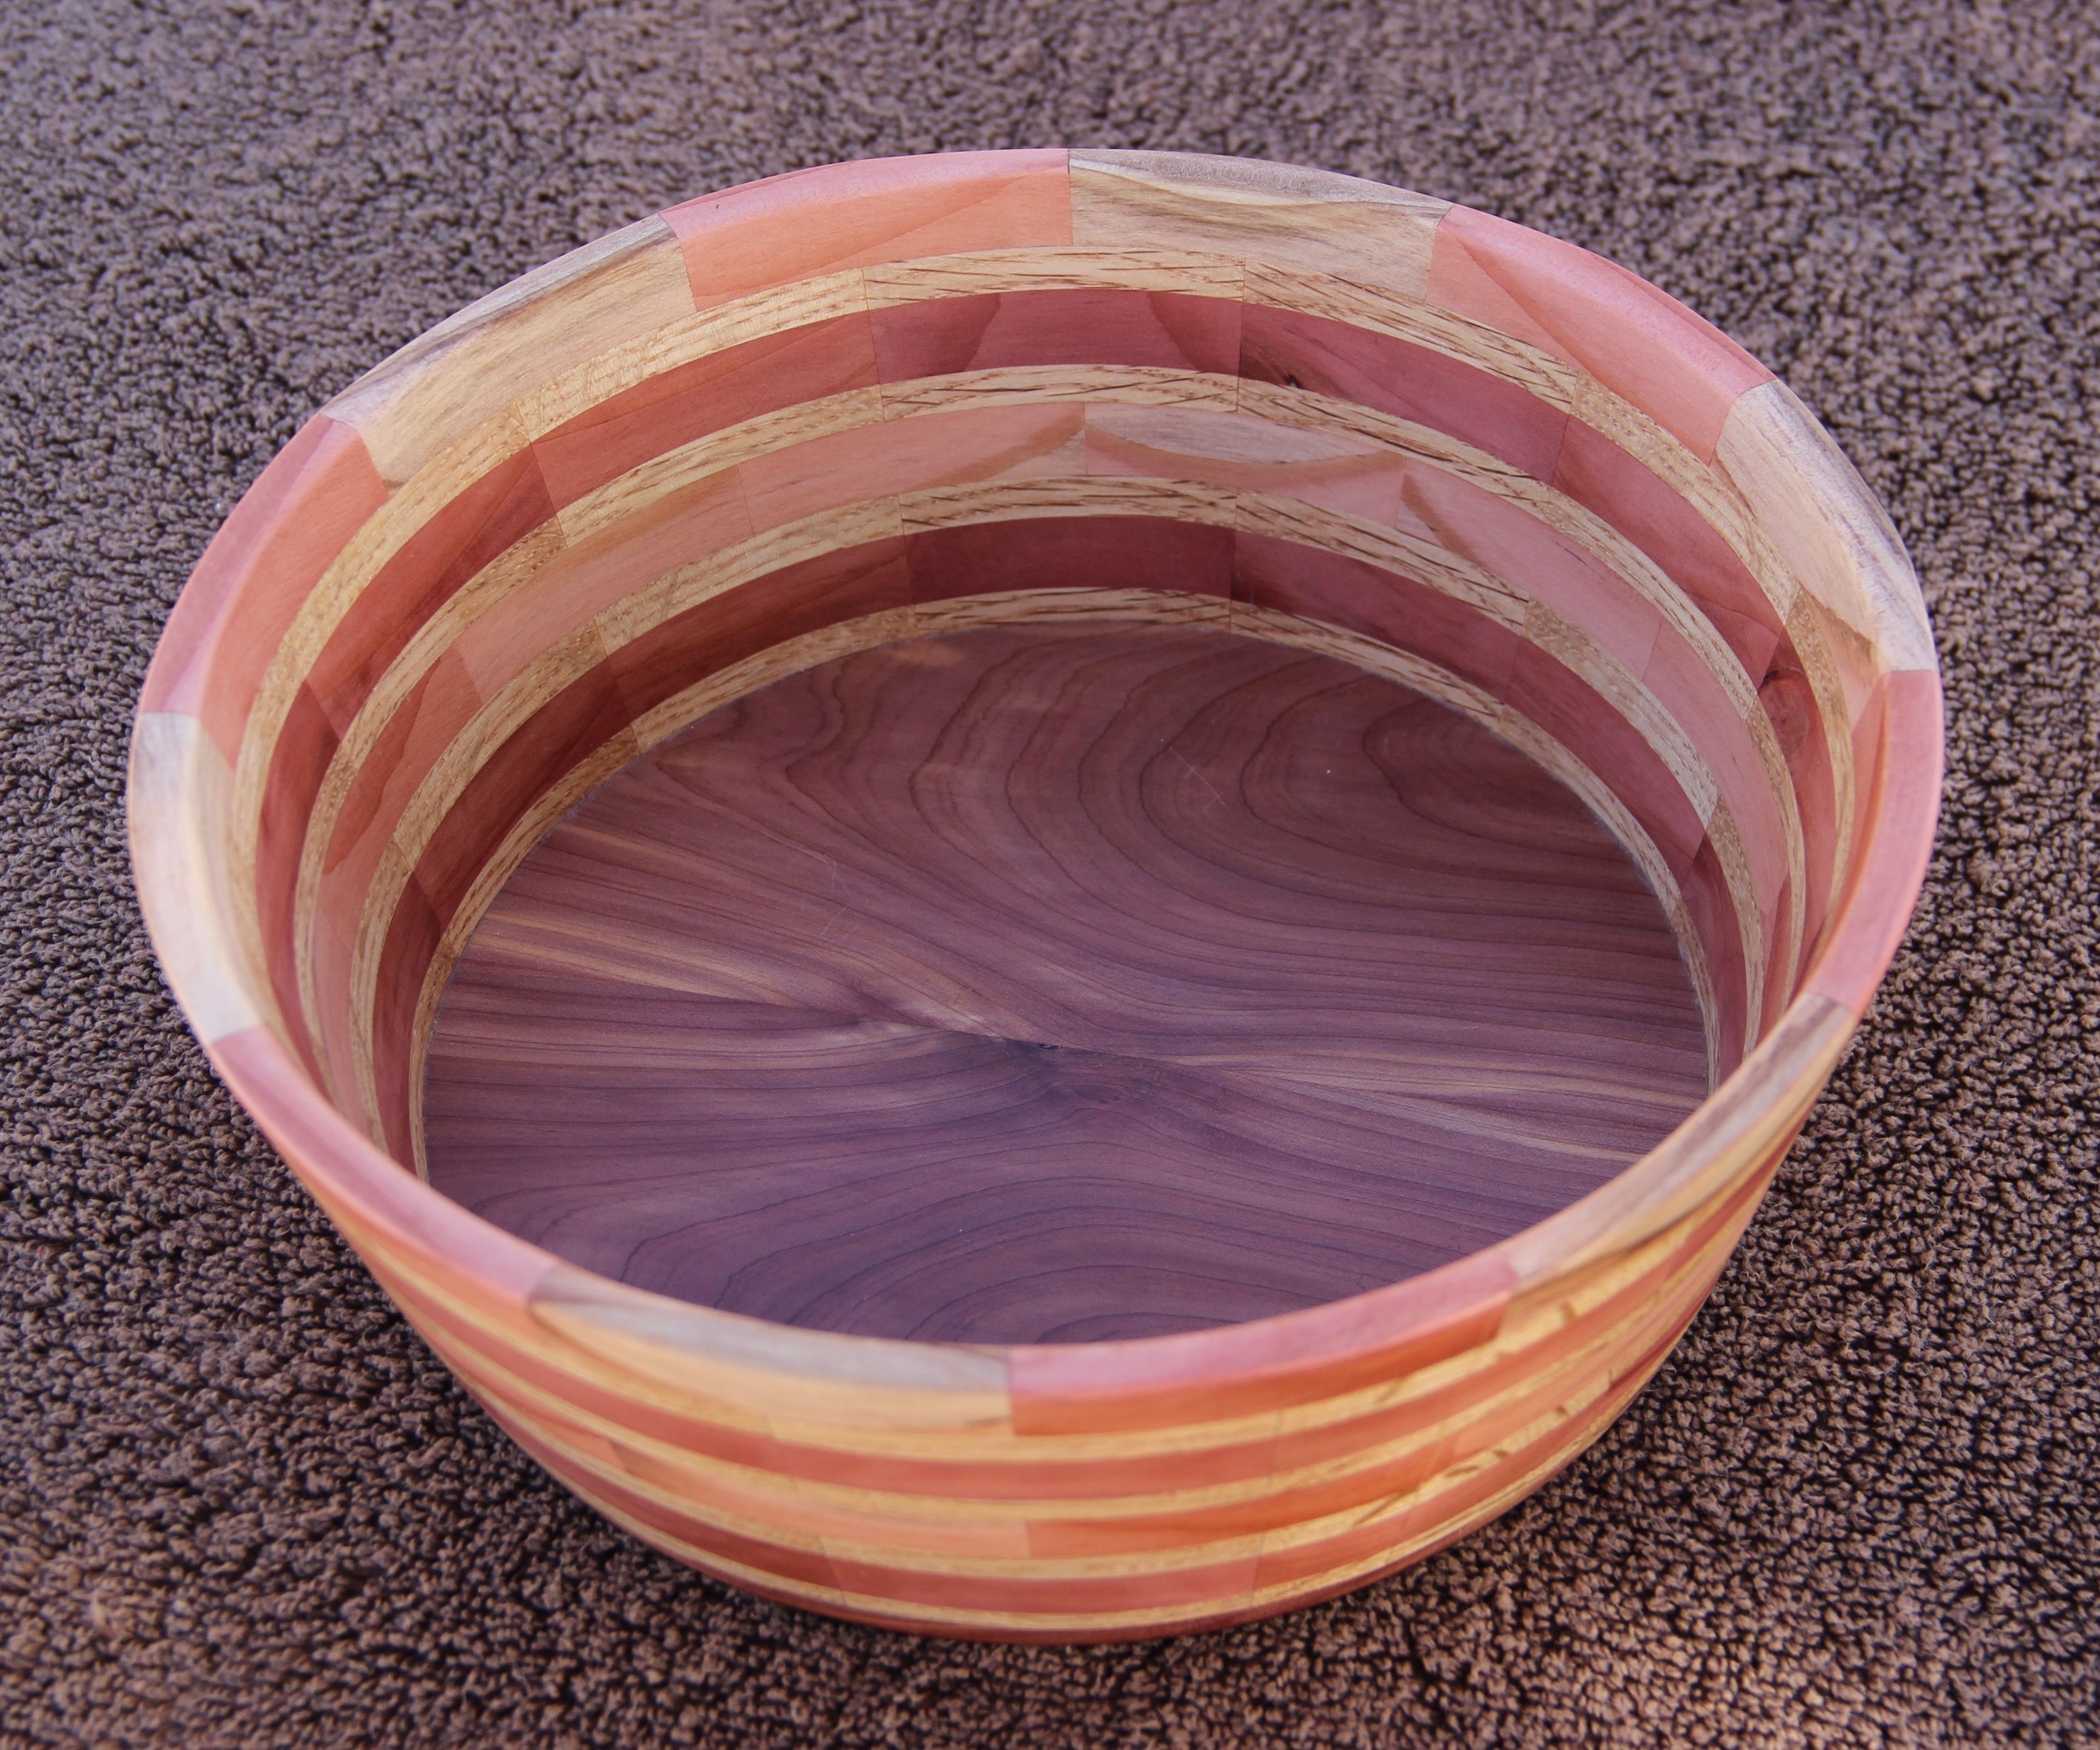 How to Make an Angled Segmented Bowl With Your Bandsaw